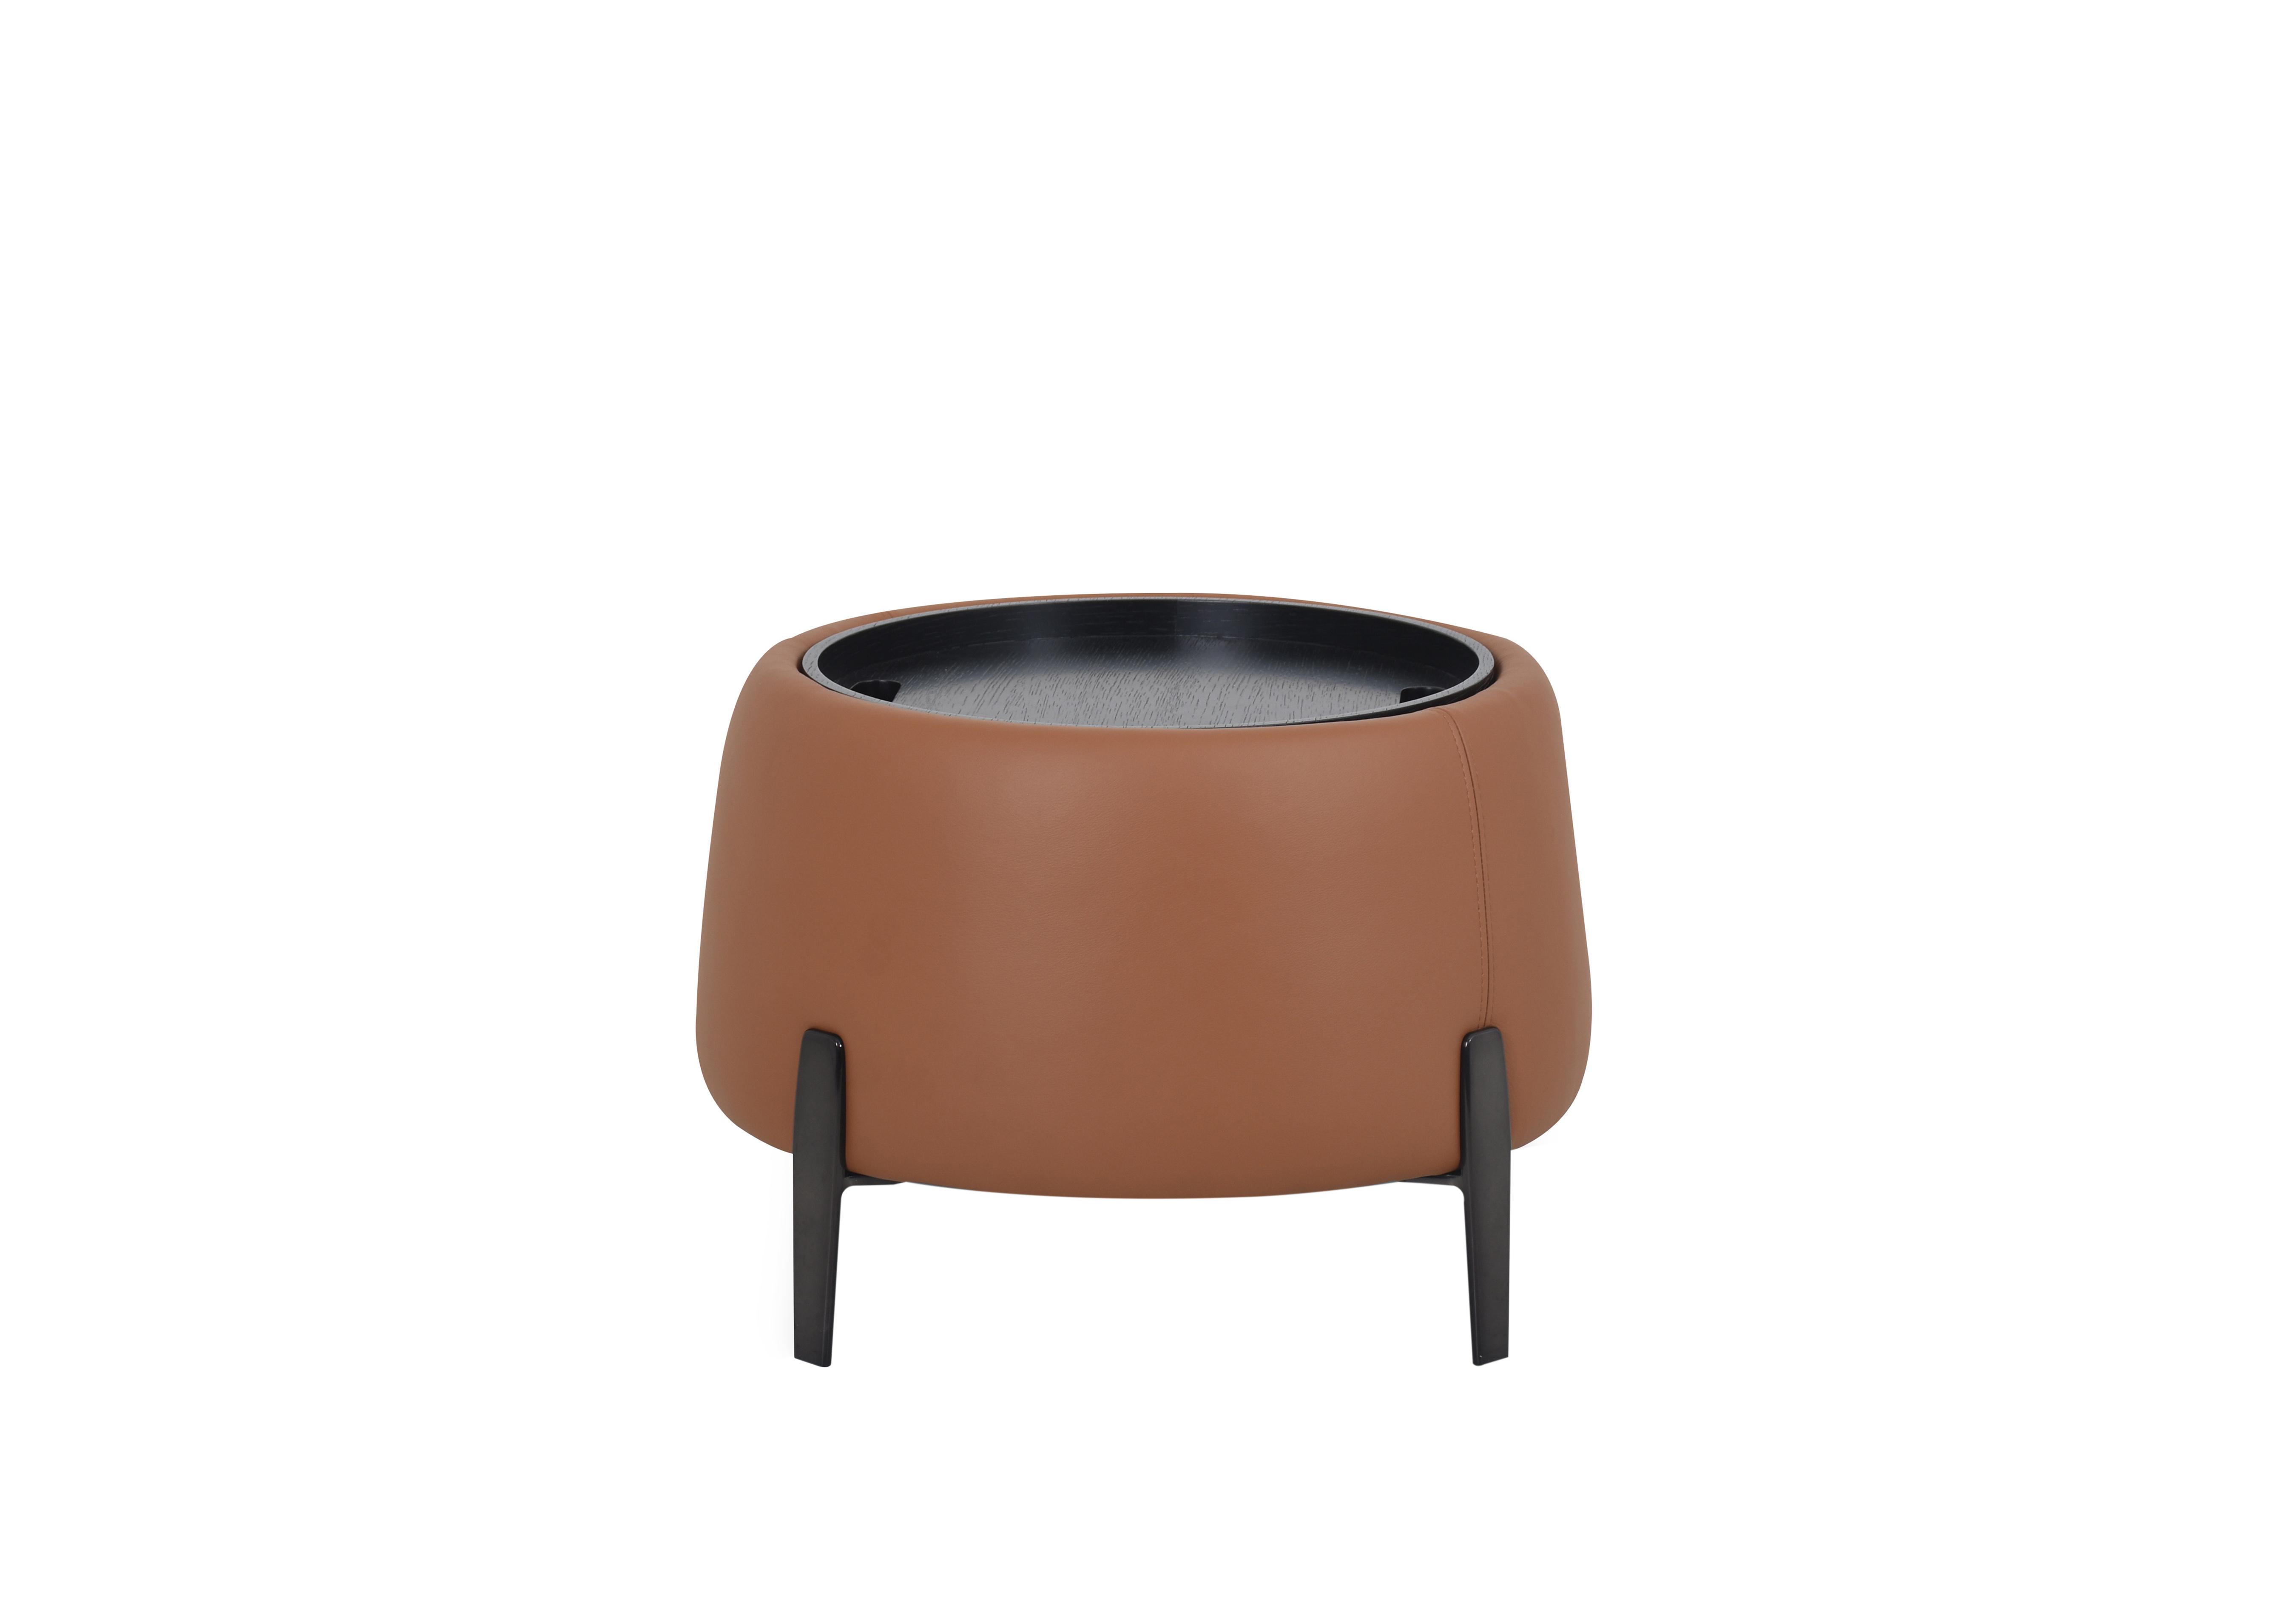 Maddox Leather Tray Storage Side Table in Nn-575e Caramel on Furniture Village